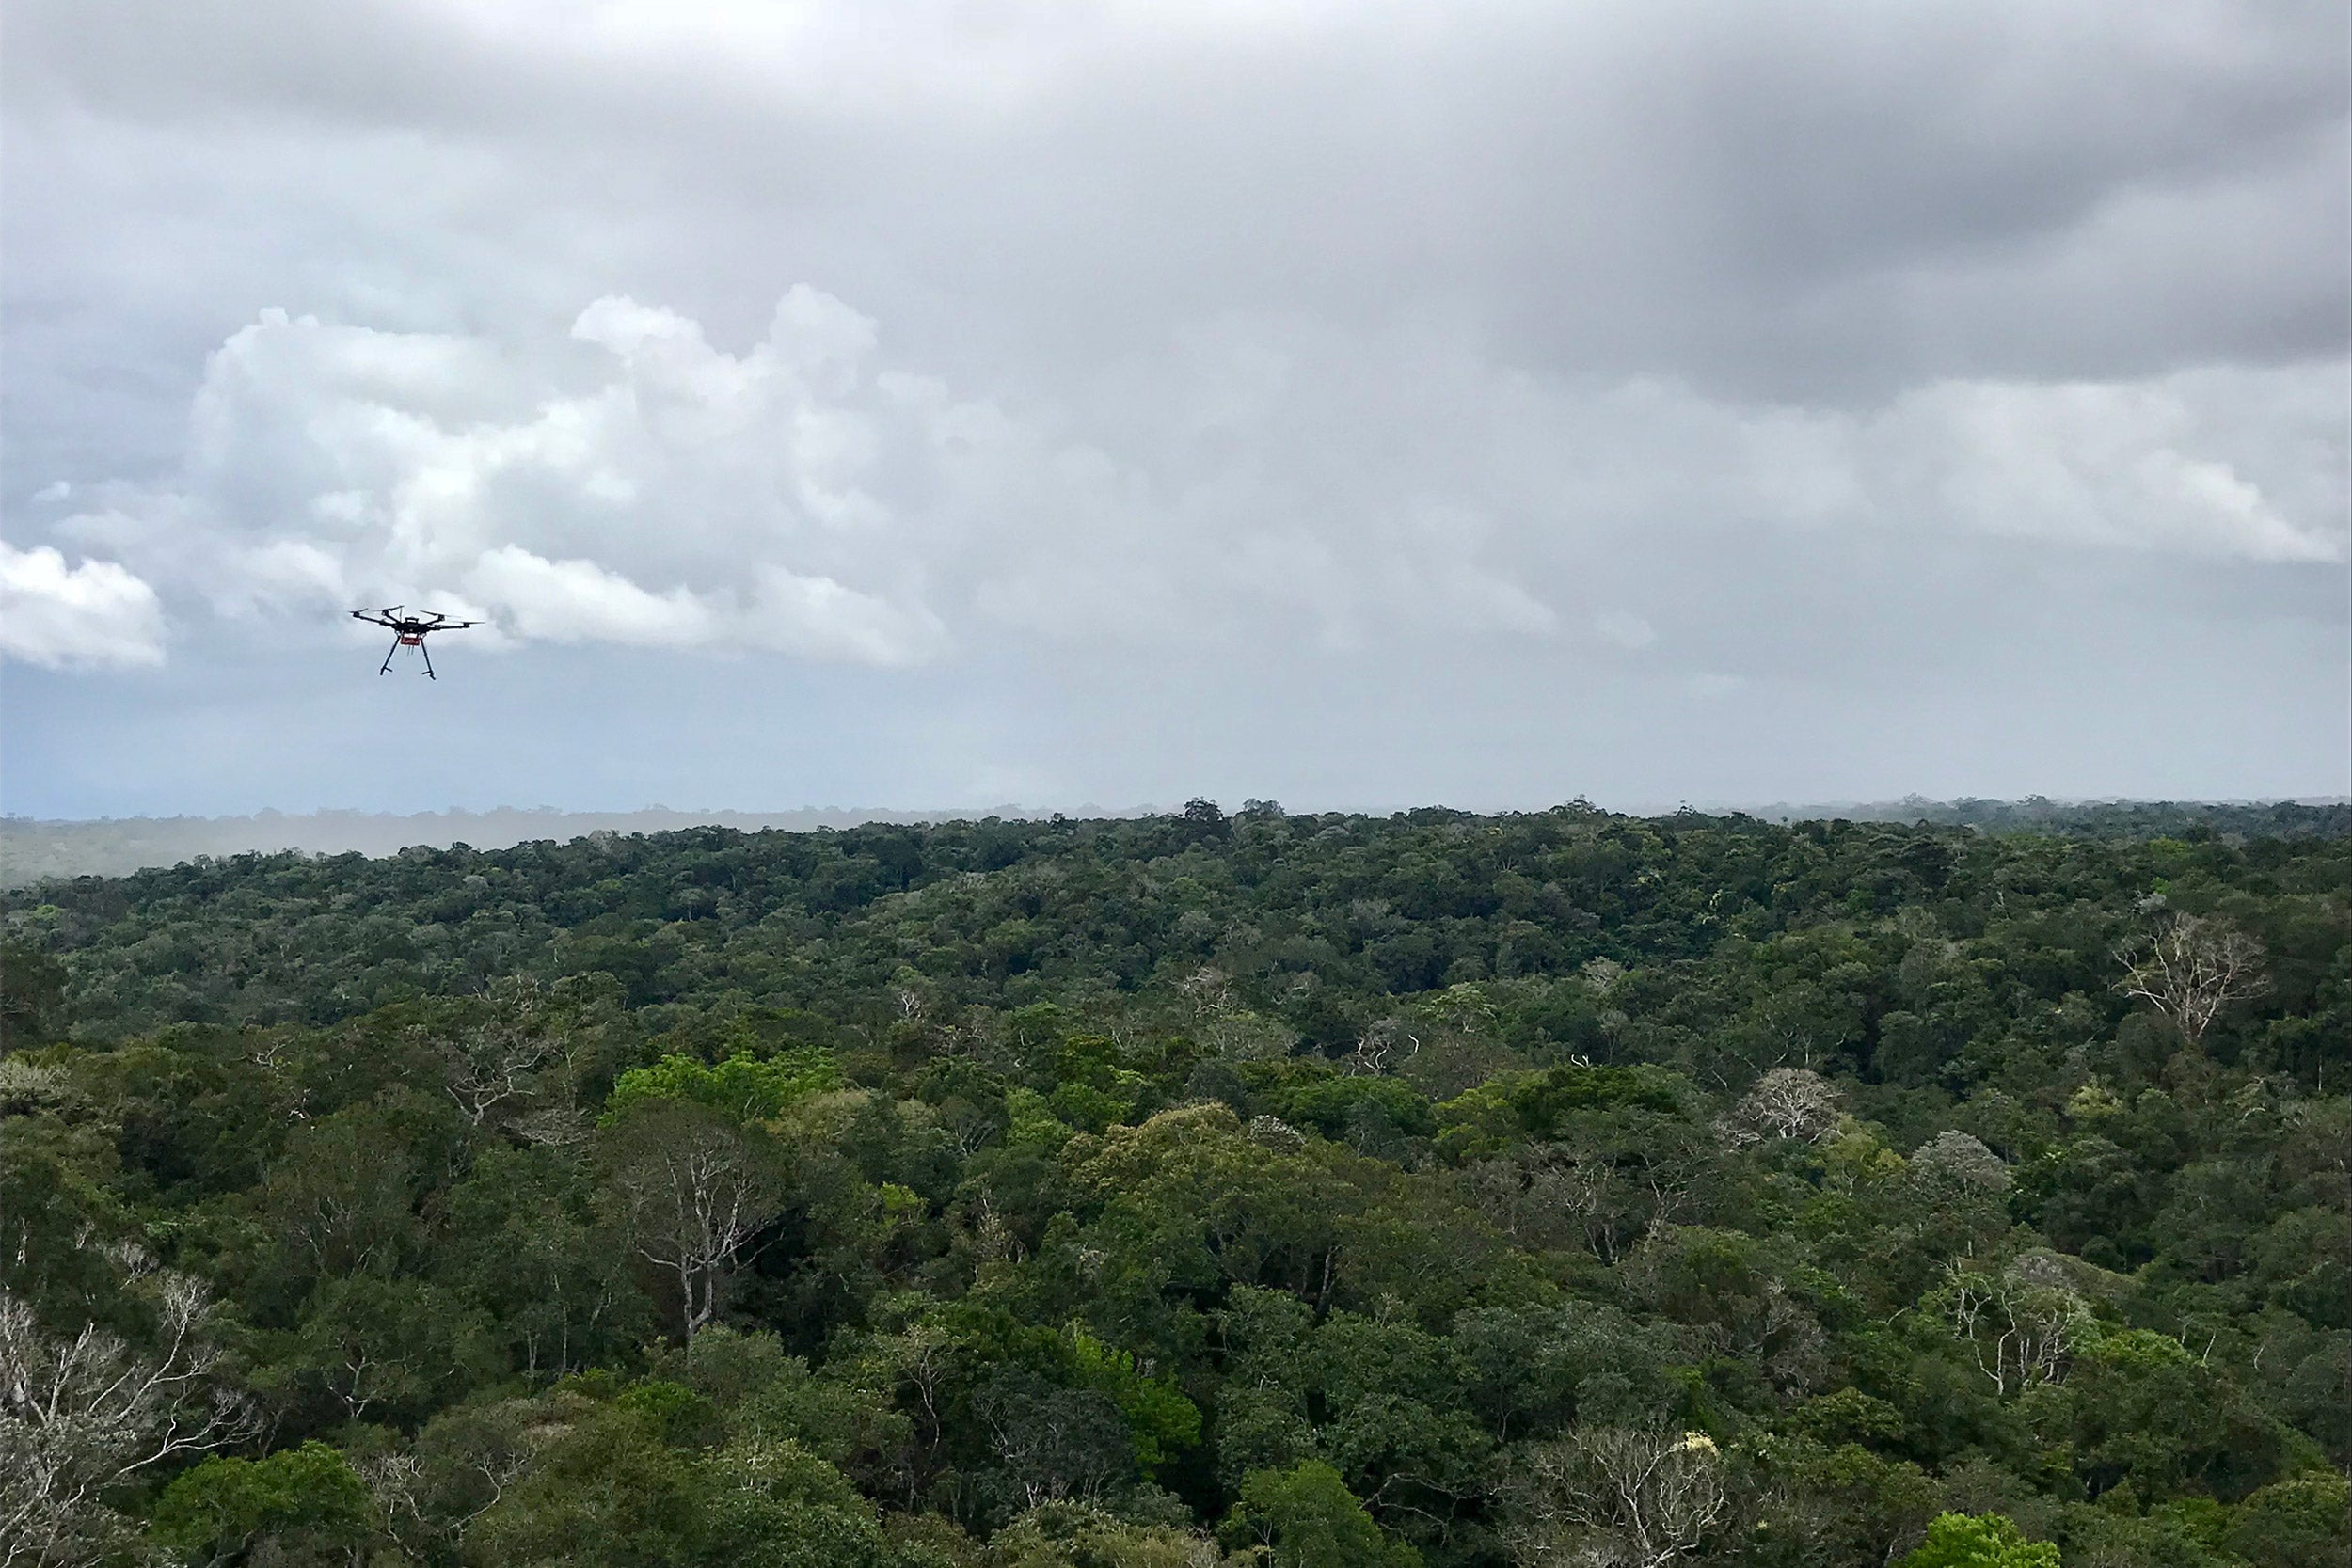 A drone flies over the amazon